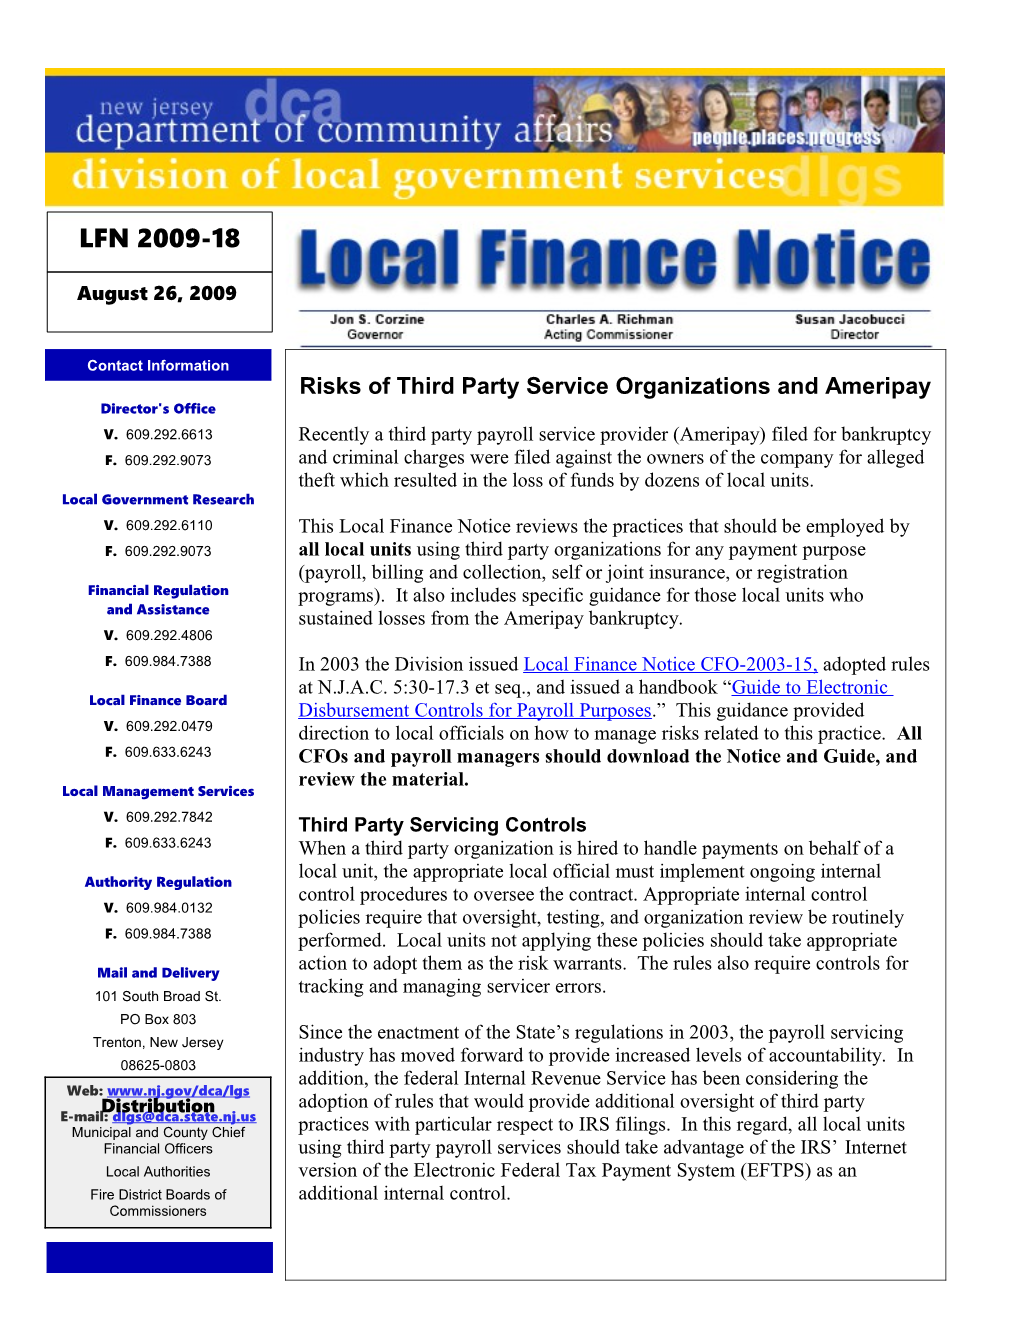 Local Finance Notice 2009-18August 26, 2009Page 1